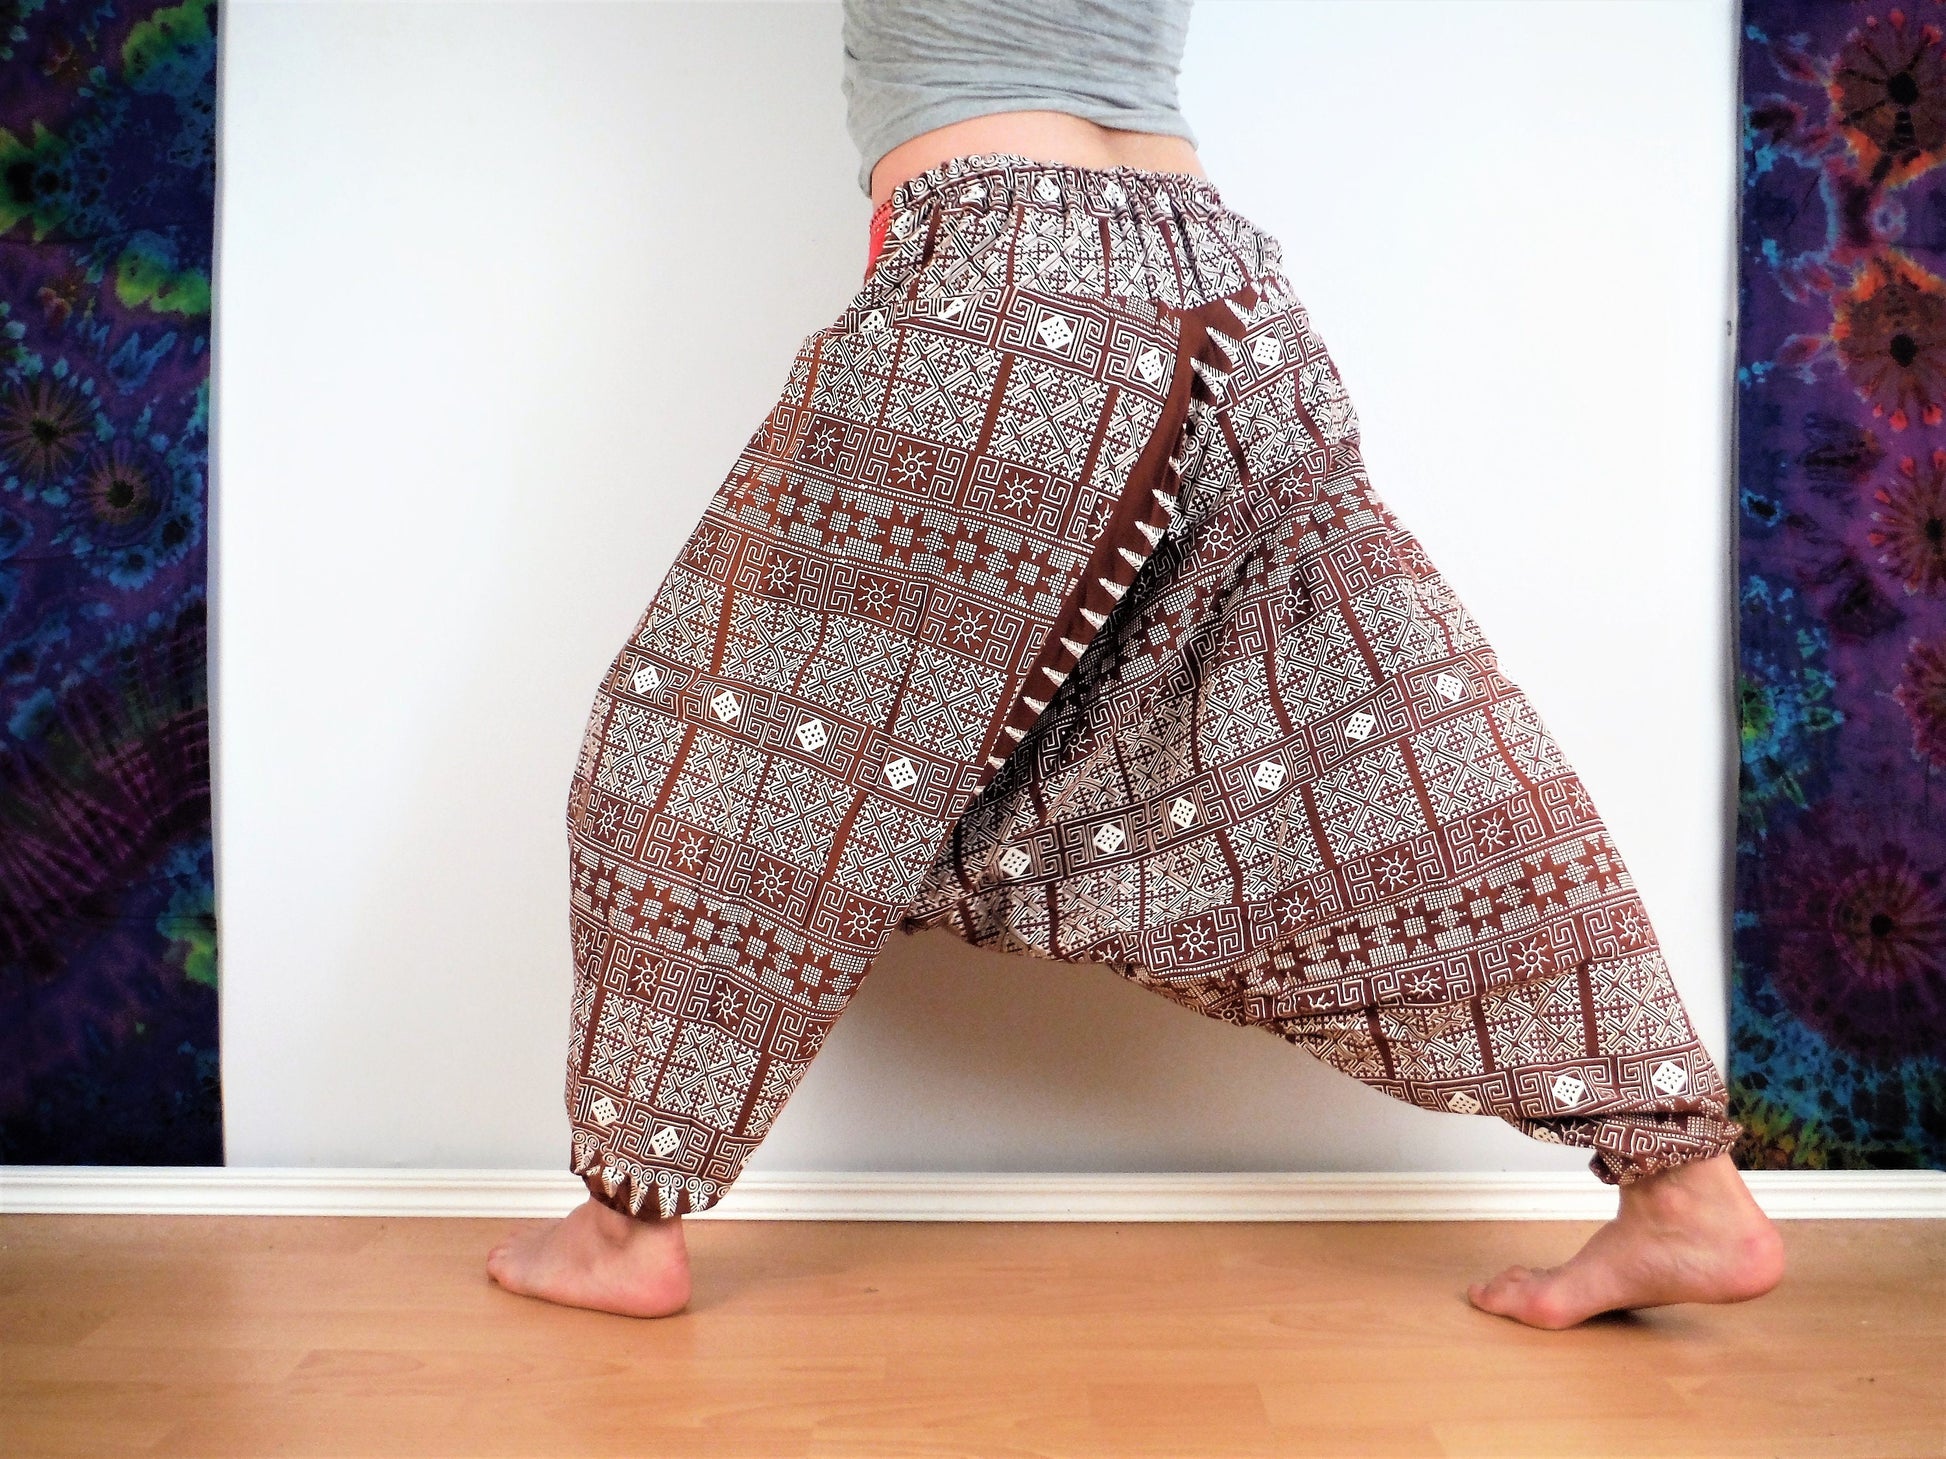 Stay Cozy in Our Harem Pants!  Harem pants, Elephant pants outfit, Harem  pants outfit